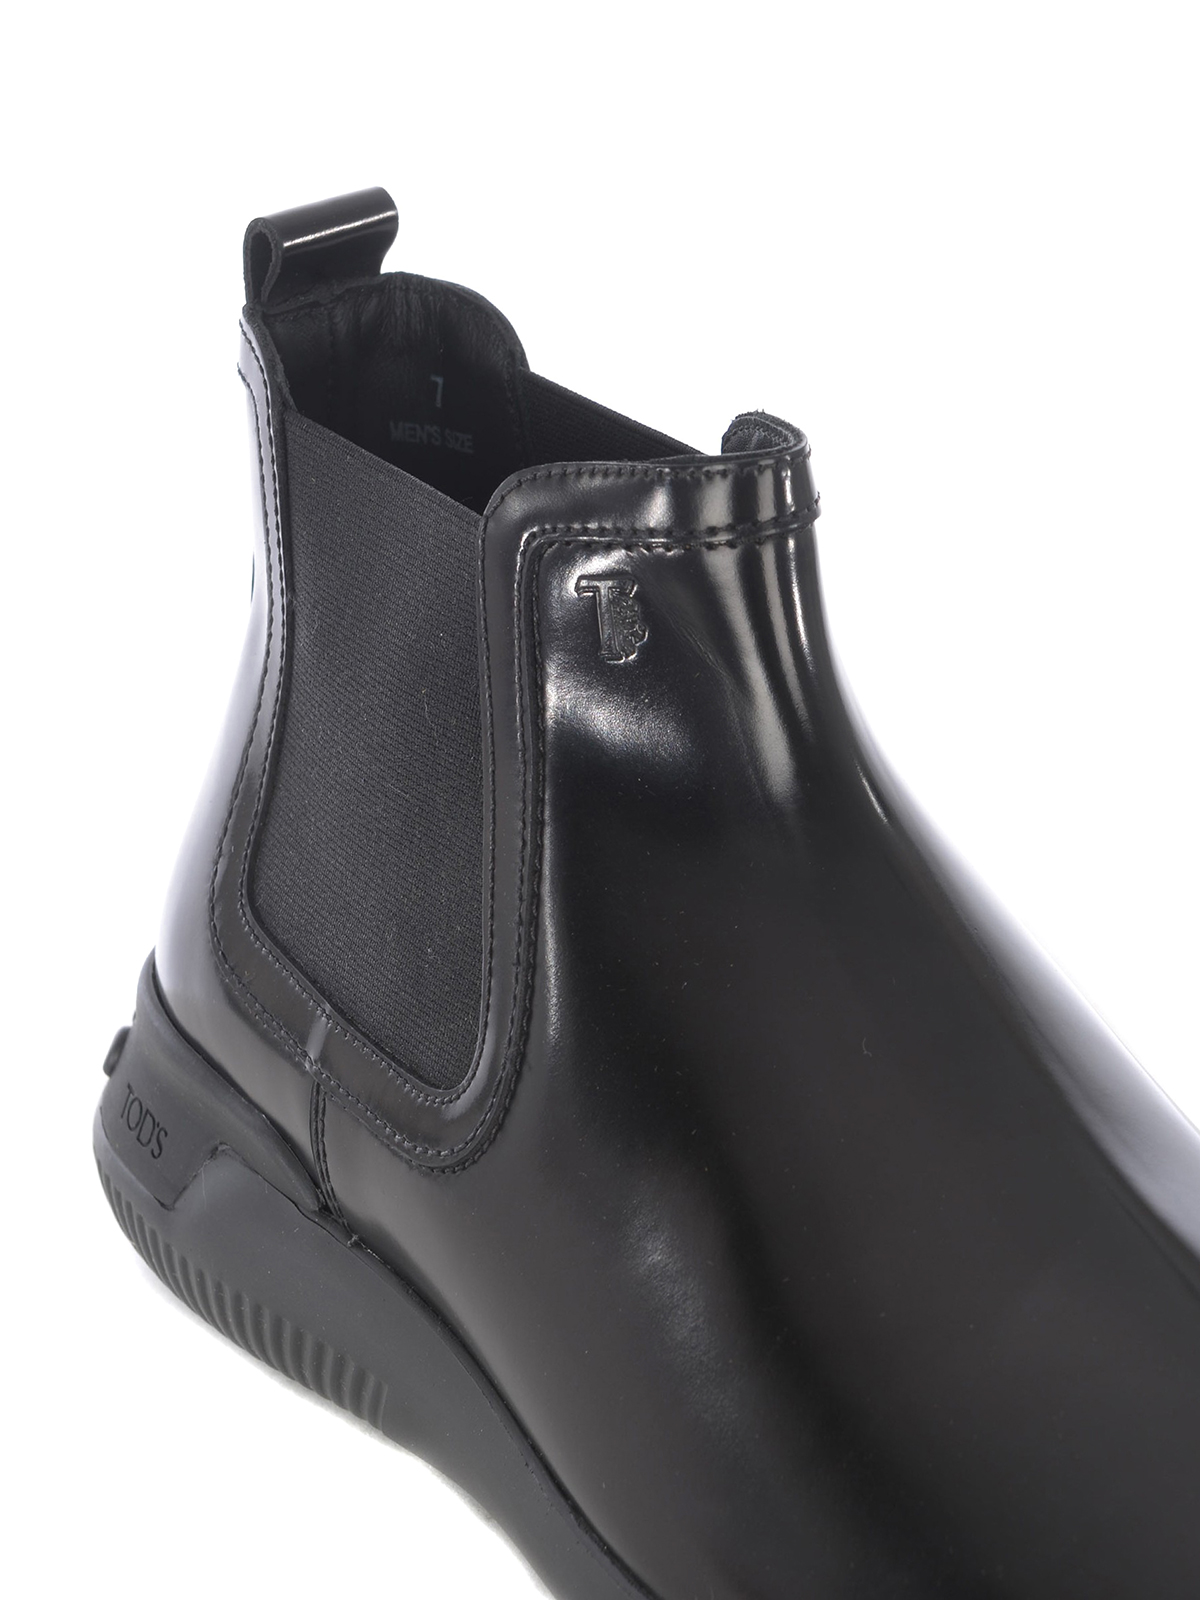 rubber sole ankle booties